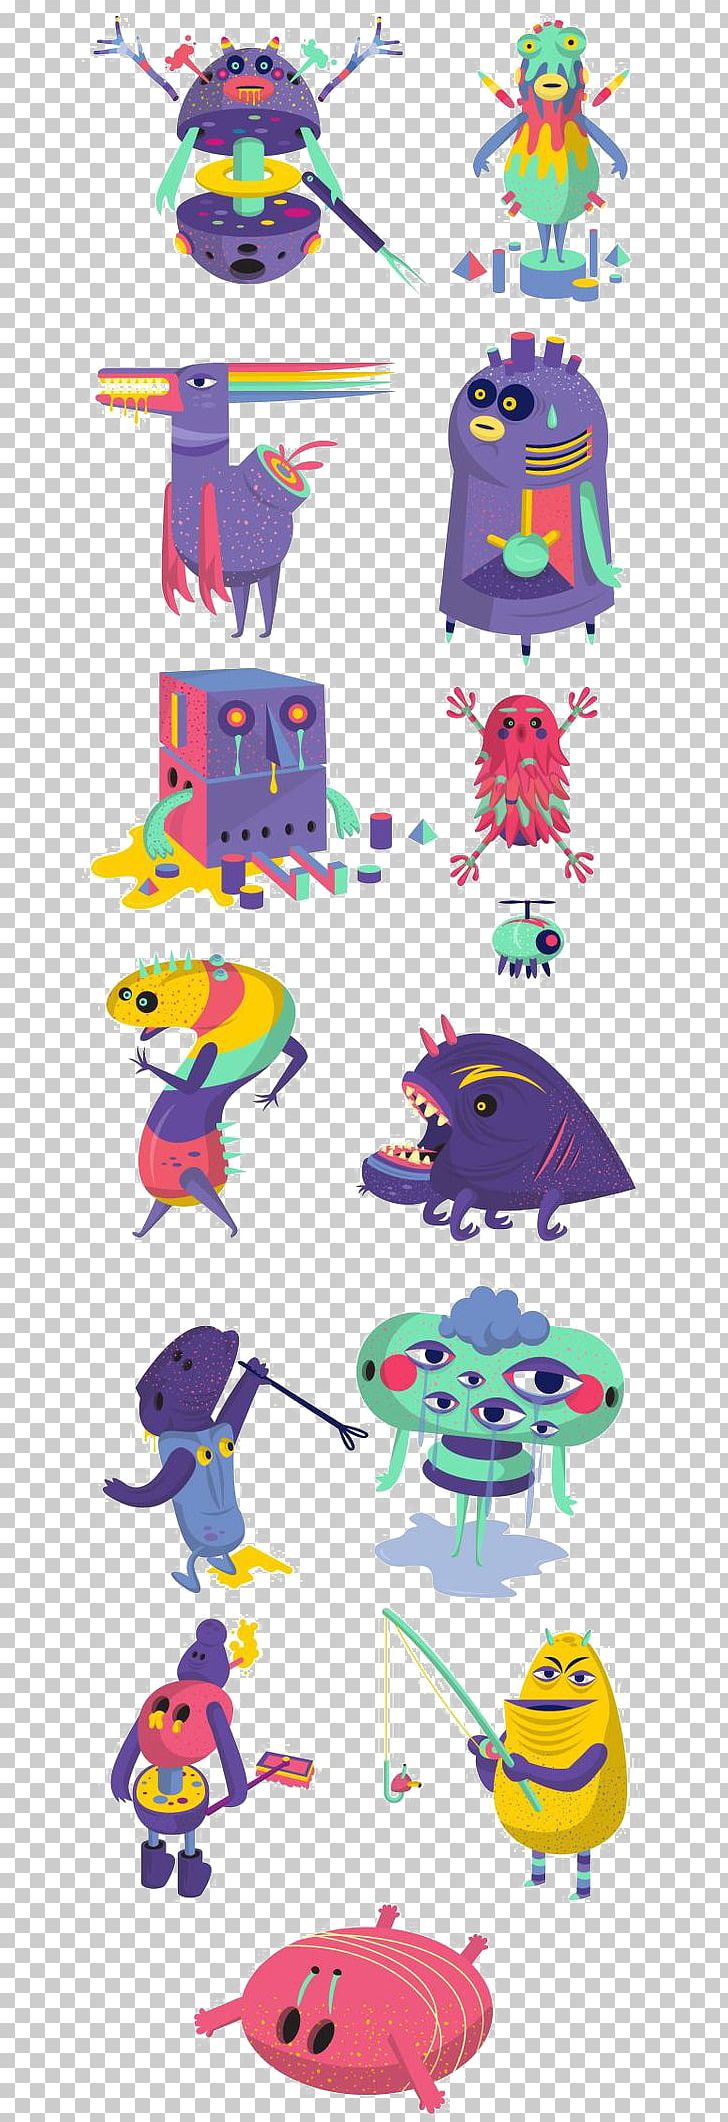 Monster Drawing Illustrator Illustration PNG, Clipart, Area, Art, Cartoon, Cartoon Monster, Cute Free PNG Download